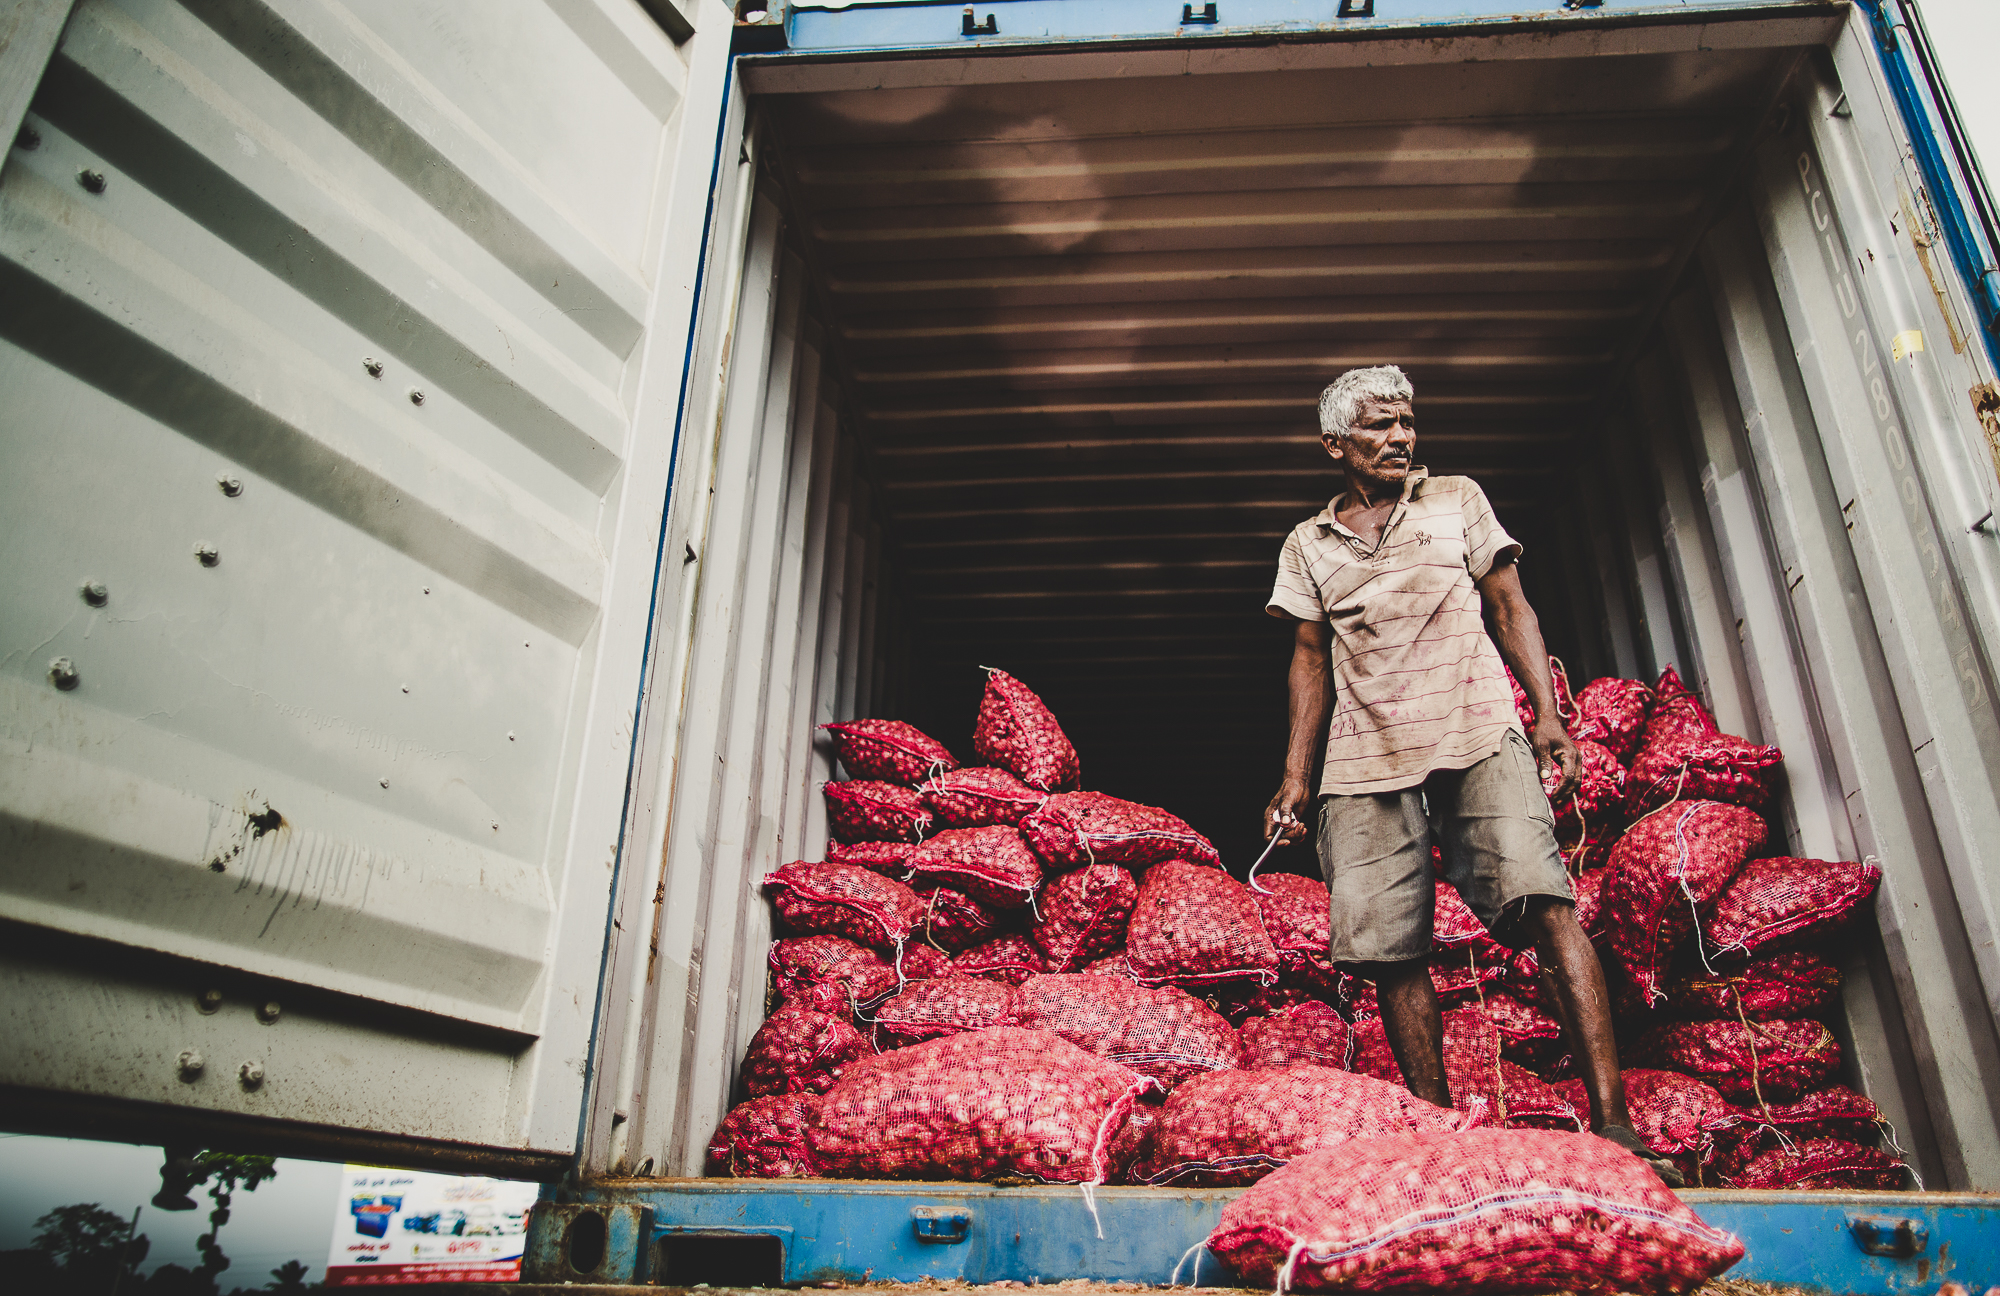 Unloading shallots from a truck